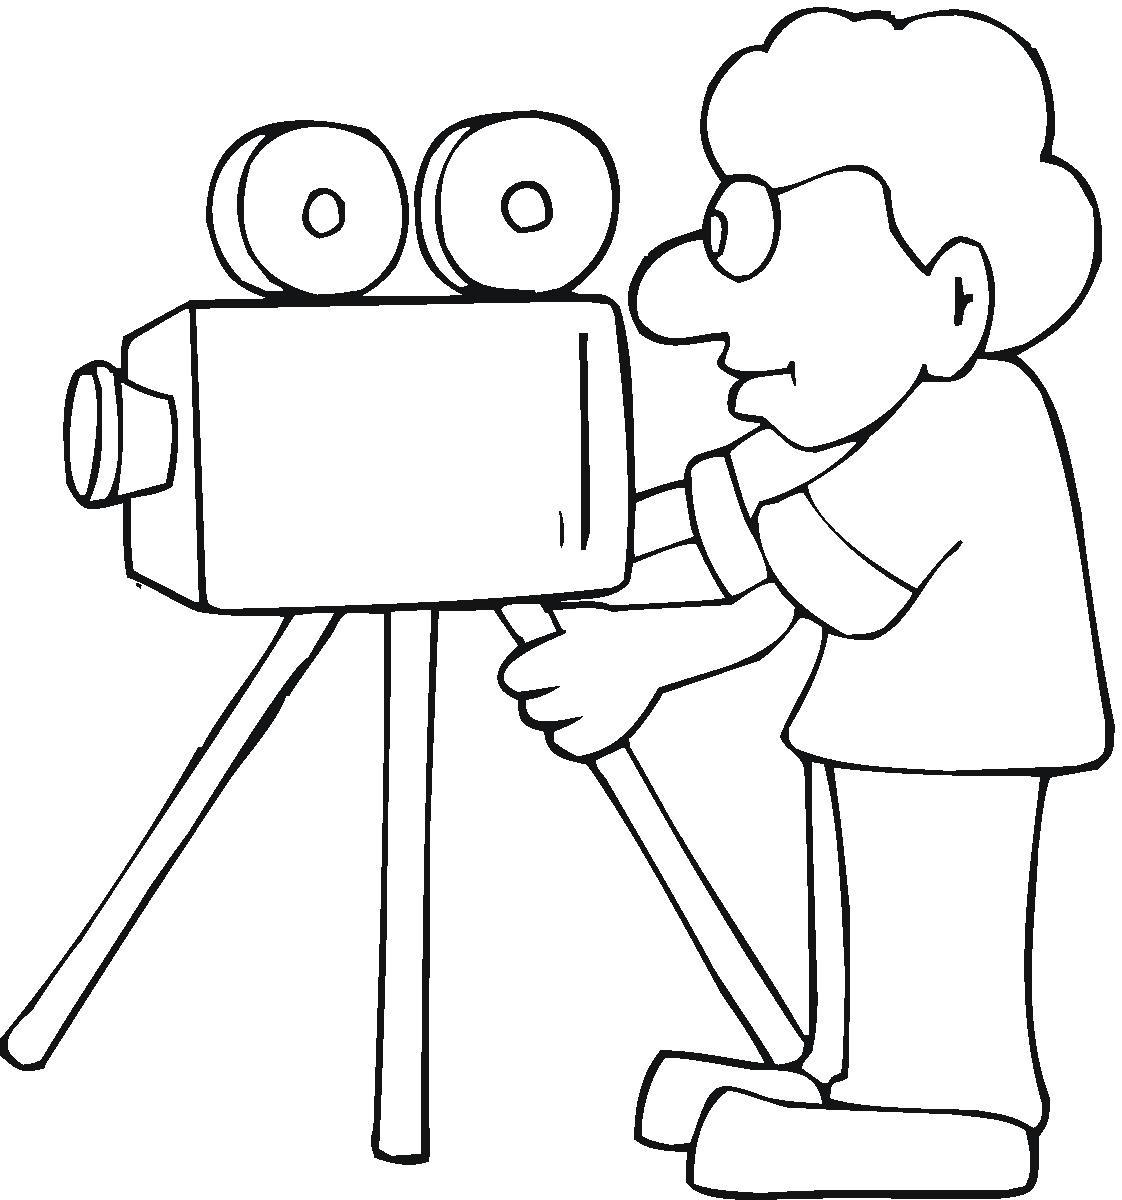 clipart of camera black and white - photo #43